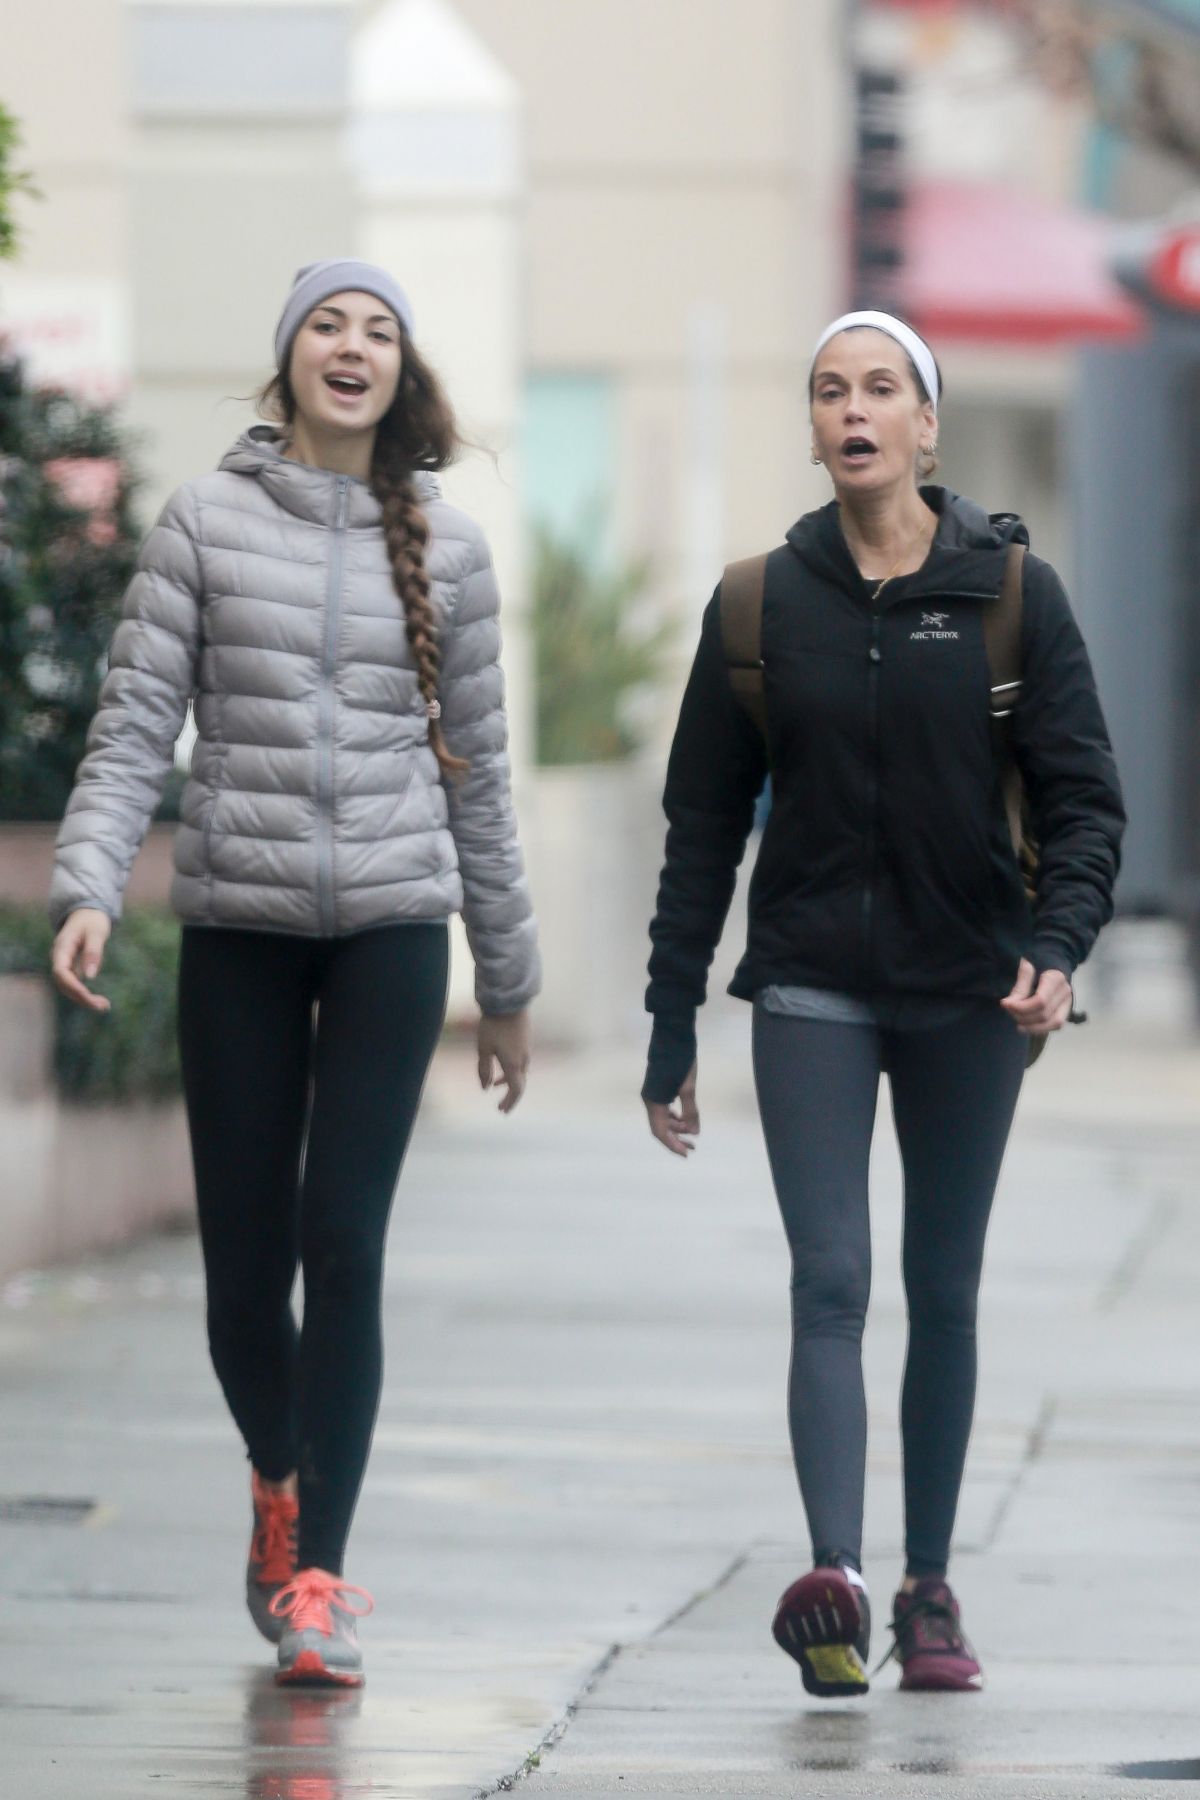 TERI HATCHER and Her Daughter EMERSON TENNEY Out in Studio City 01/10/2017